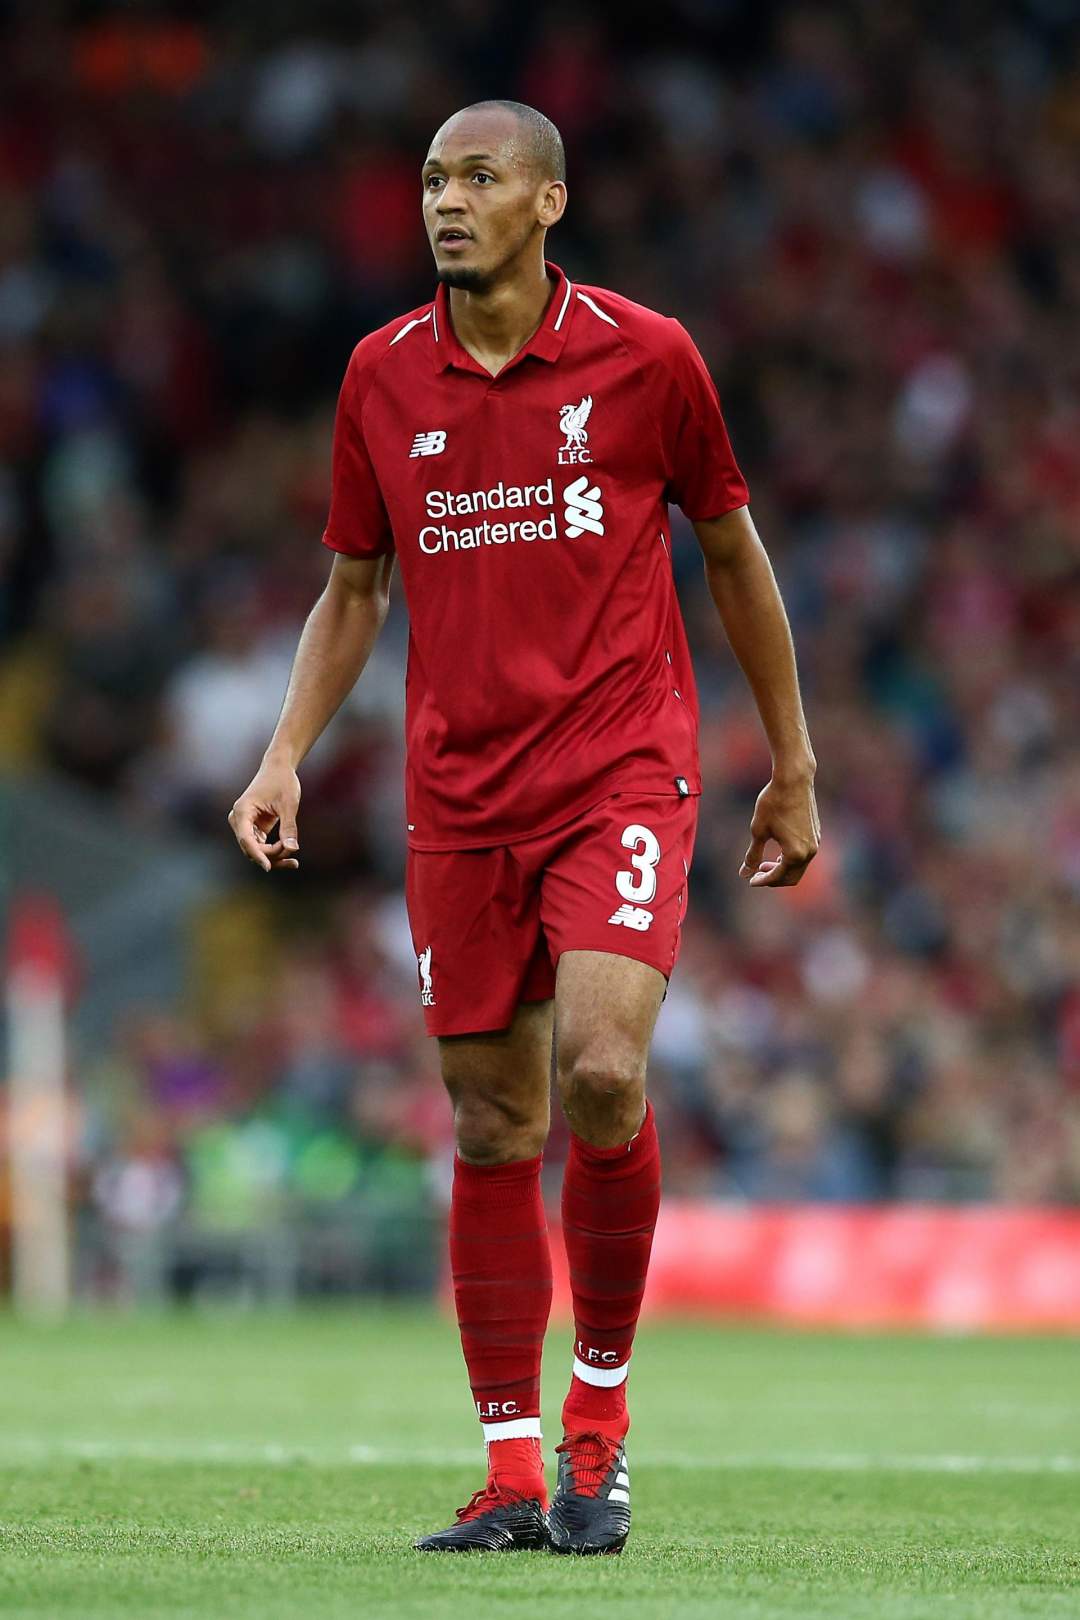 Liverpool midfielder Fabinho criticised by fans for his 'dreadful' full debut performance vs Chelsea